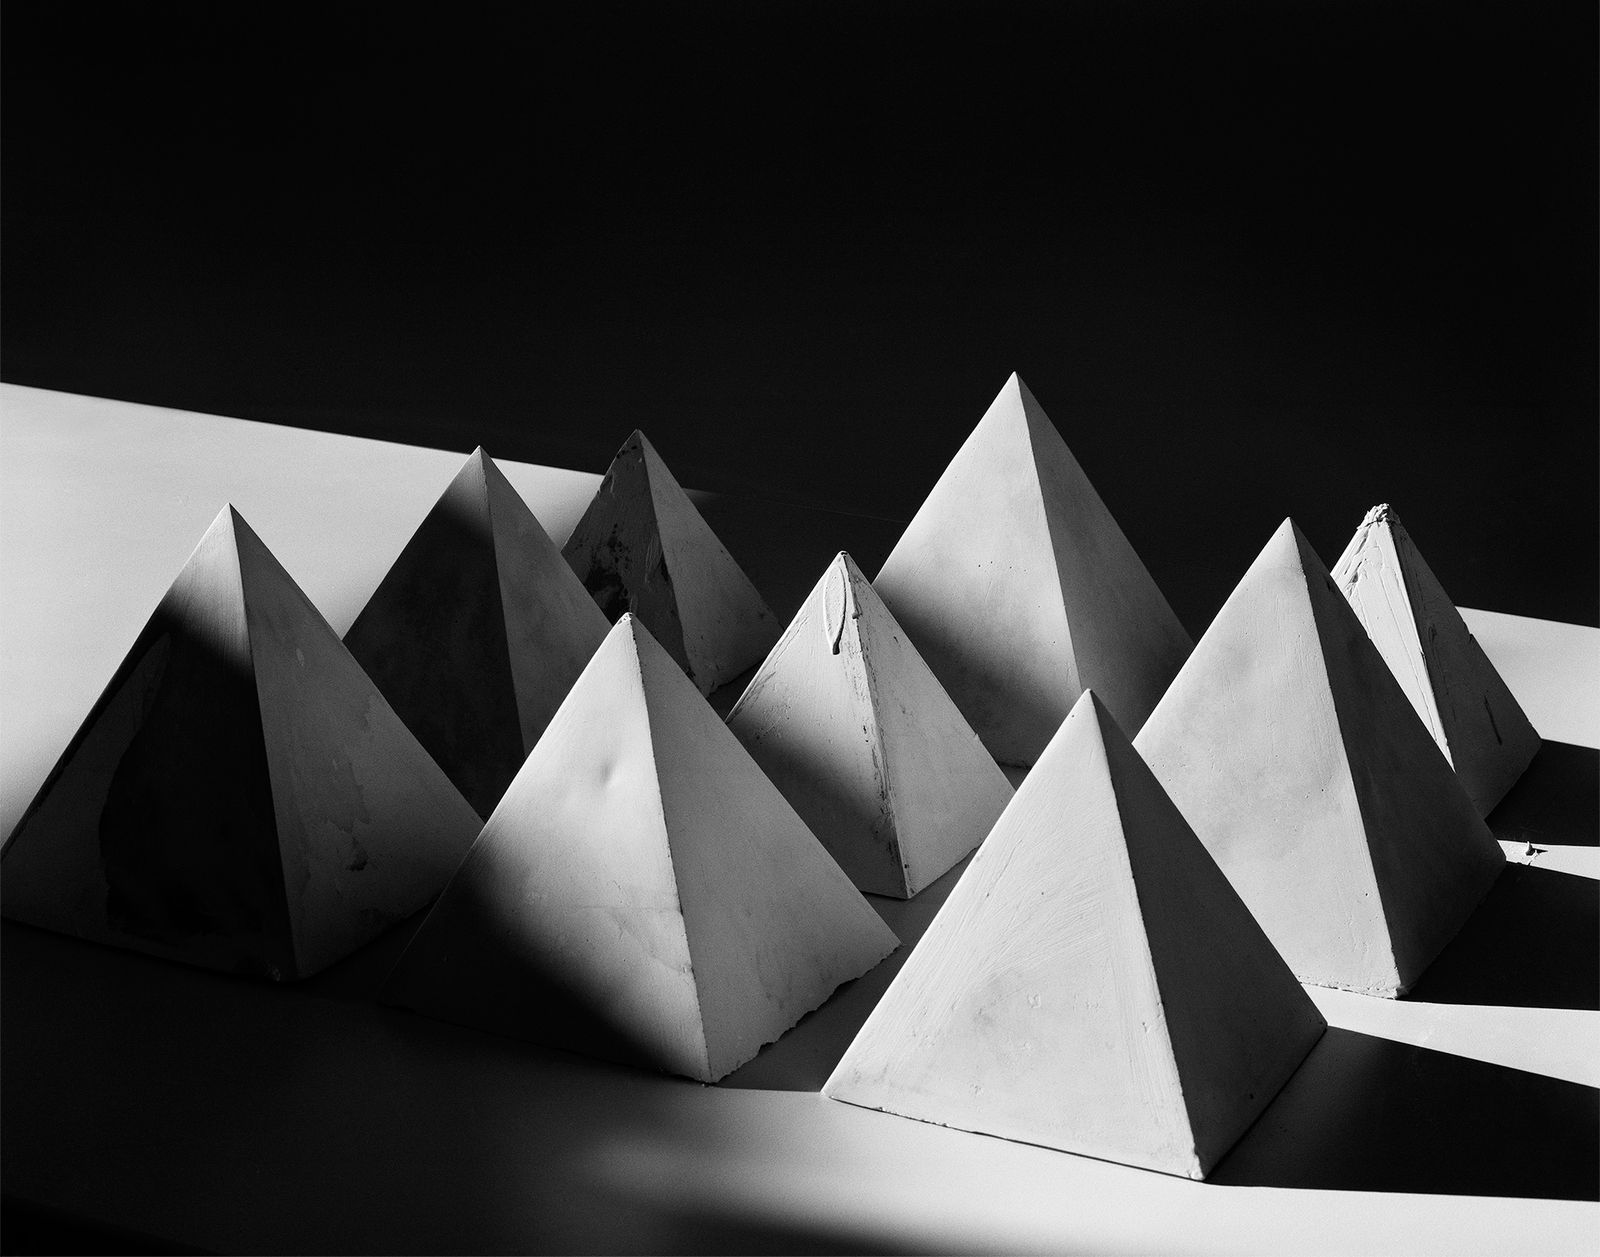 © Jin Li - Photographed the pyramid I made, it is trying to show a fictional landscape.